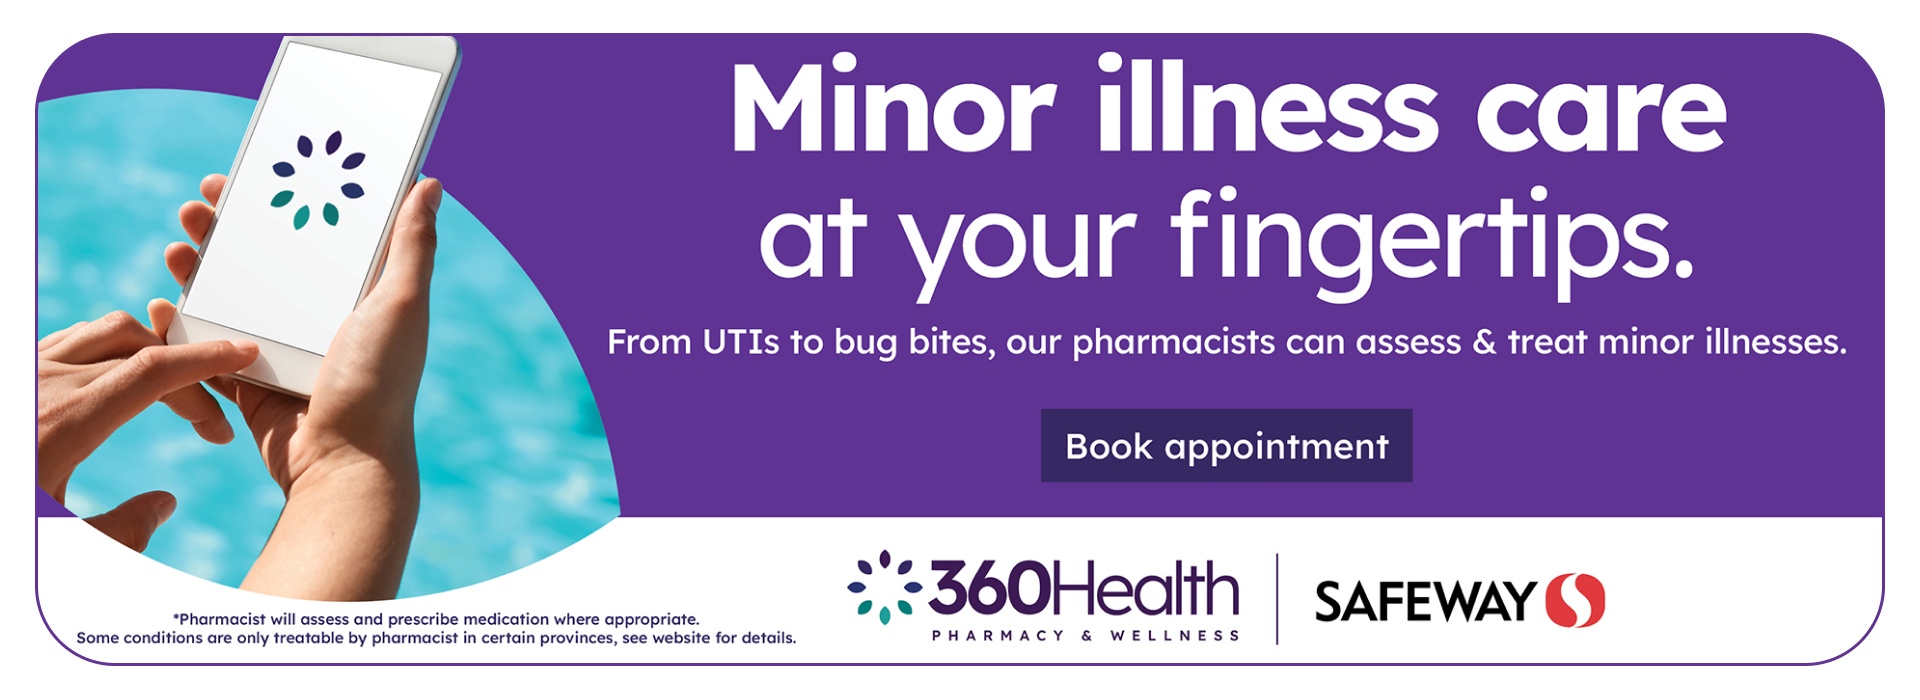 Minor illness care at your fingertips